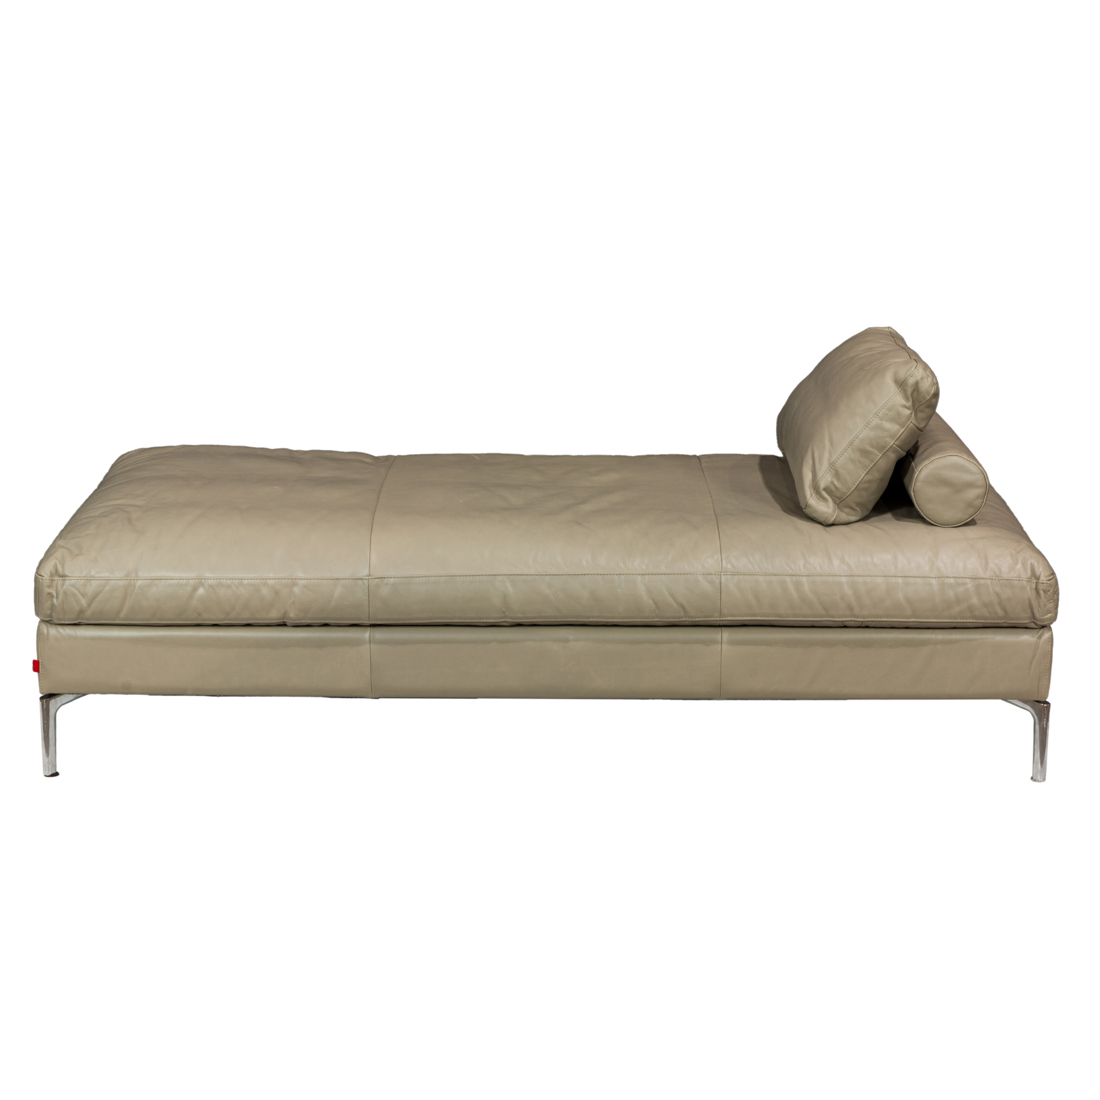 A MODERN EQ3 LEATHER UPHOLSTERED